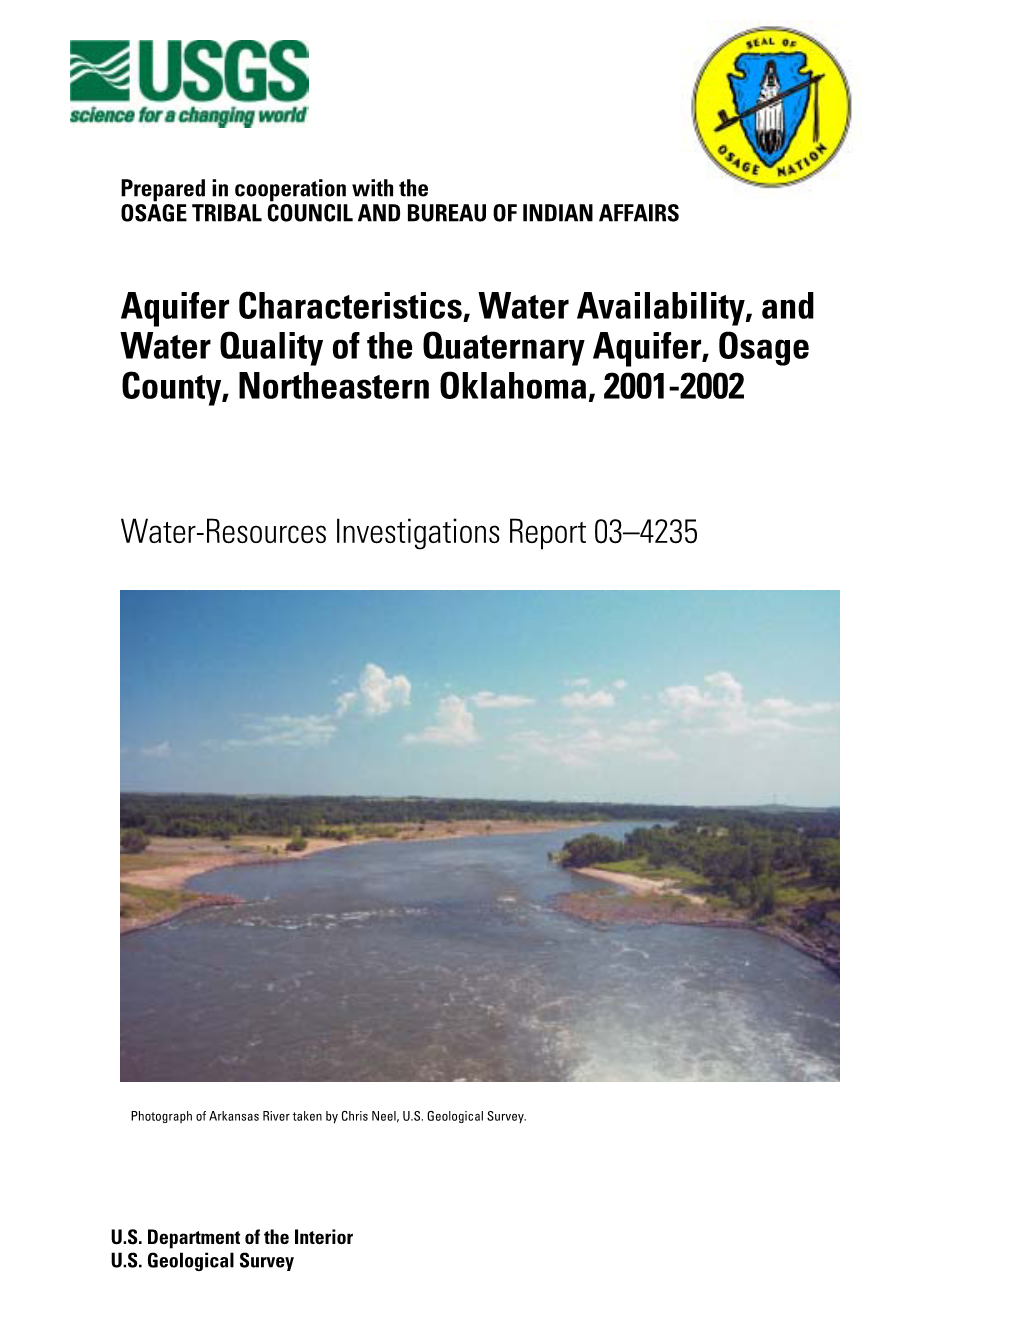 Aquifer Characteristics, Water Availability, and Water Quality of the Quaternary Aquifer, Osage County, Northeastern Oklahoma, 2001-2002